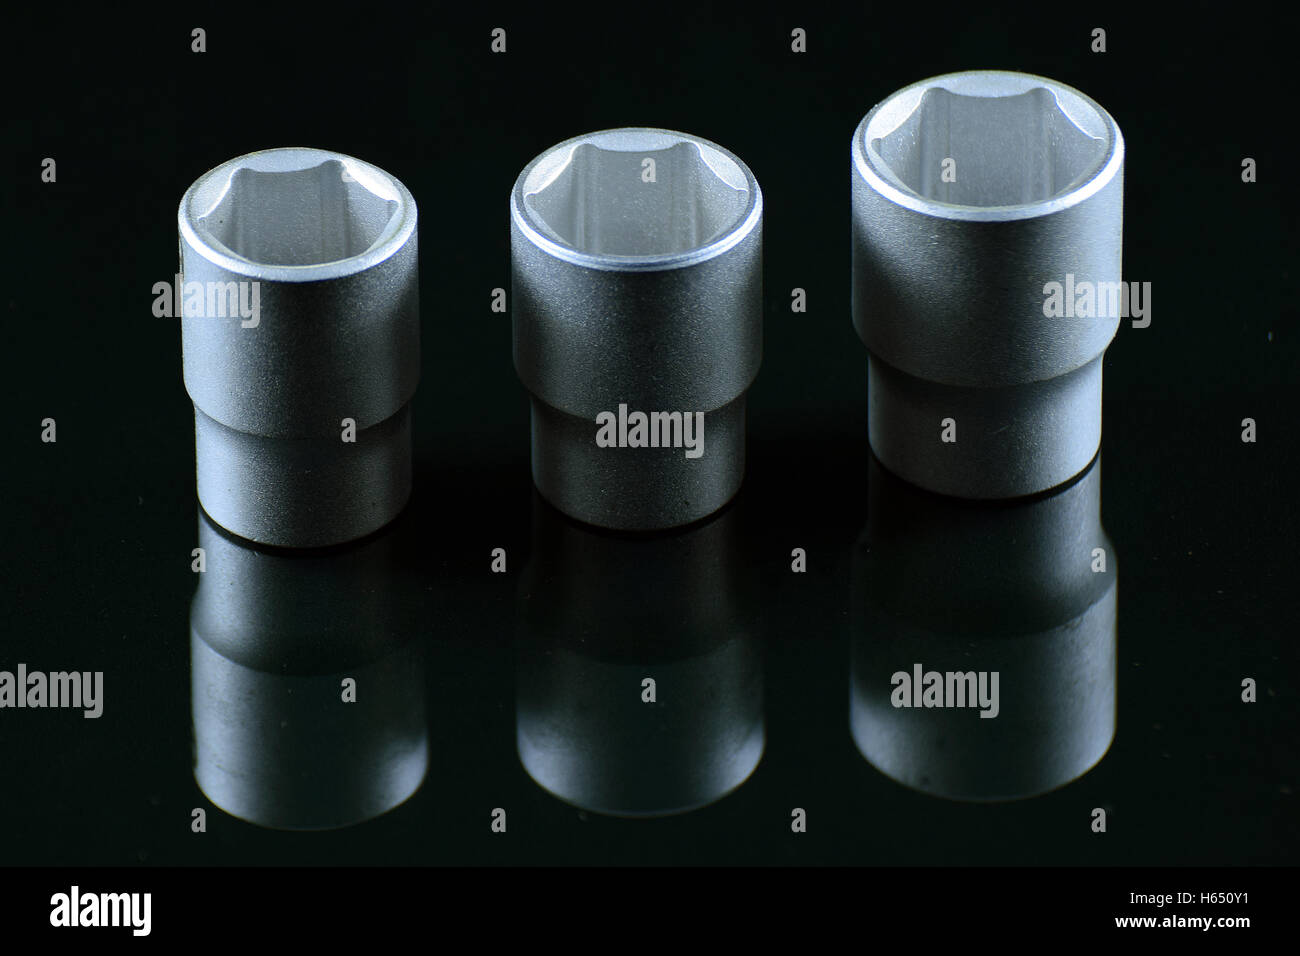 Three sockets with black background and reflection. Stock Photo